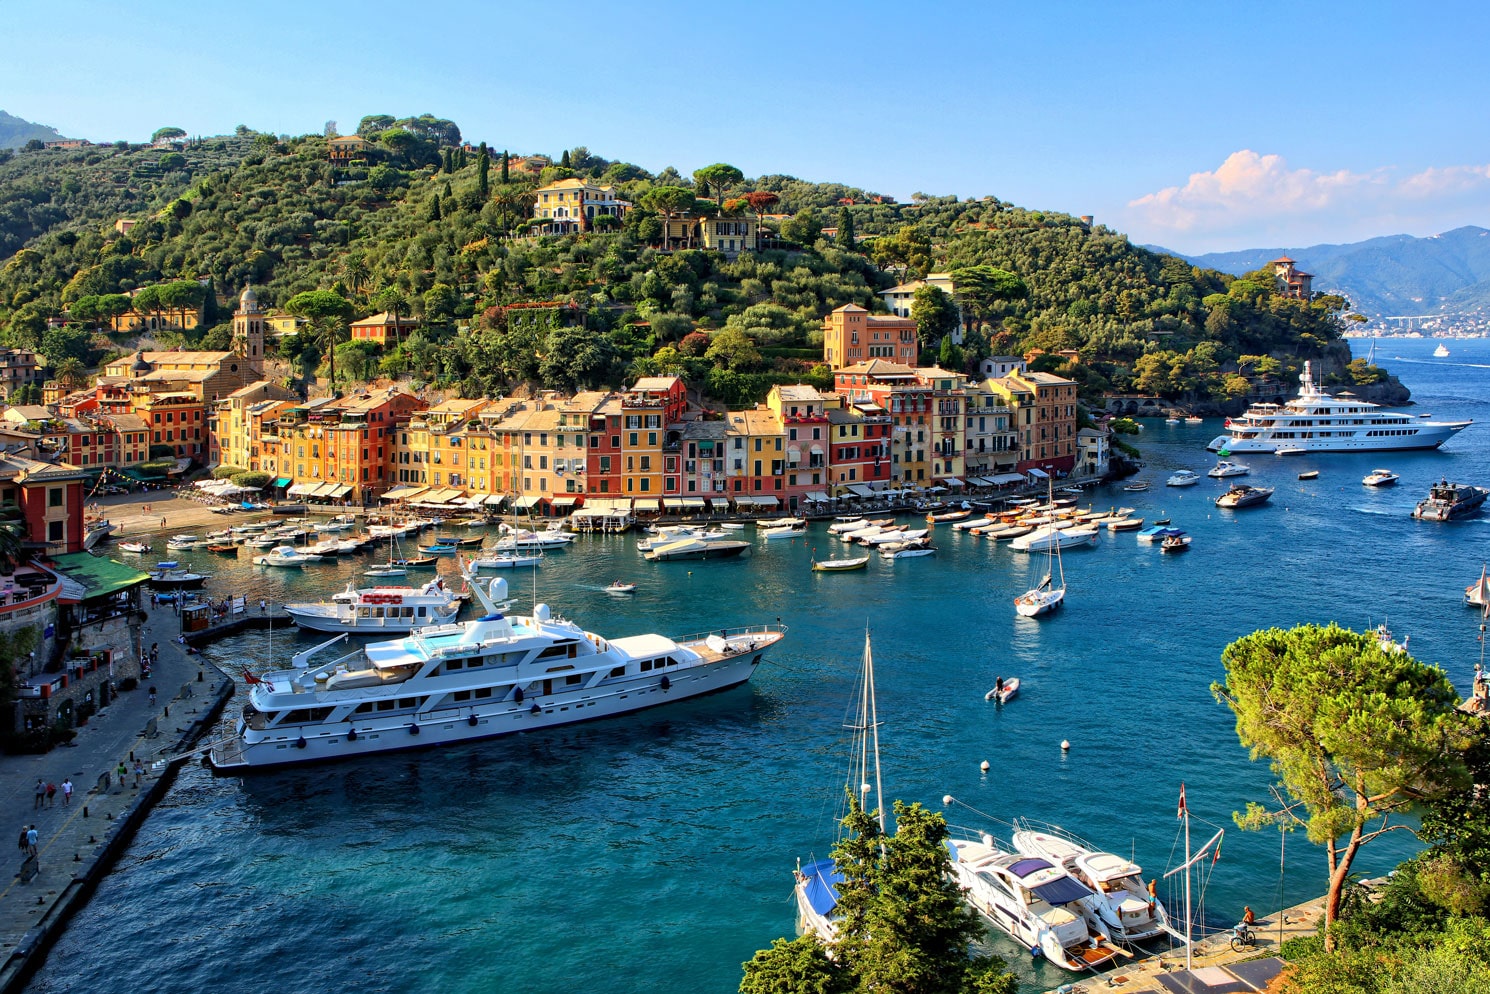 <trp-post-container data-trp-post-id='750'>The Top 10 Hotels in Portofino Italian Riviera</trp-post-container>